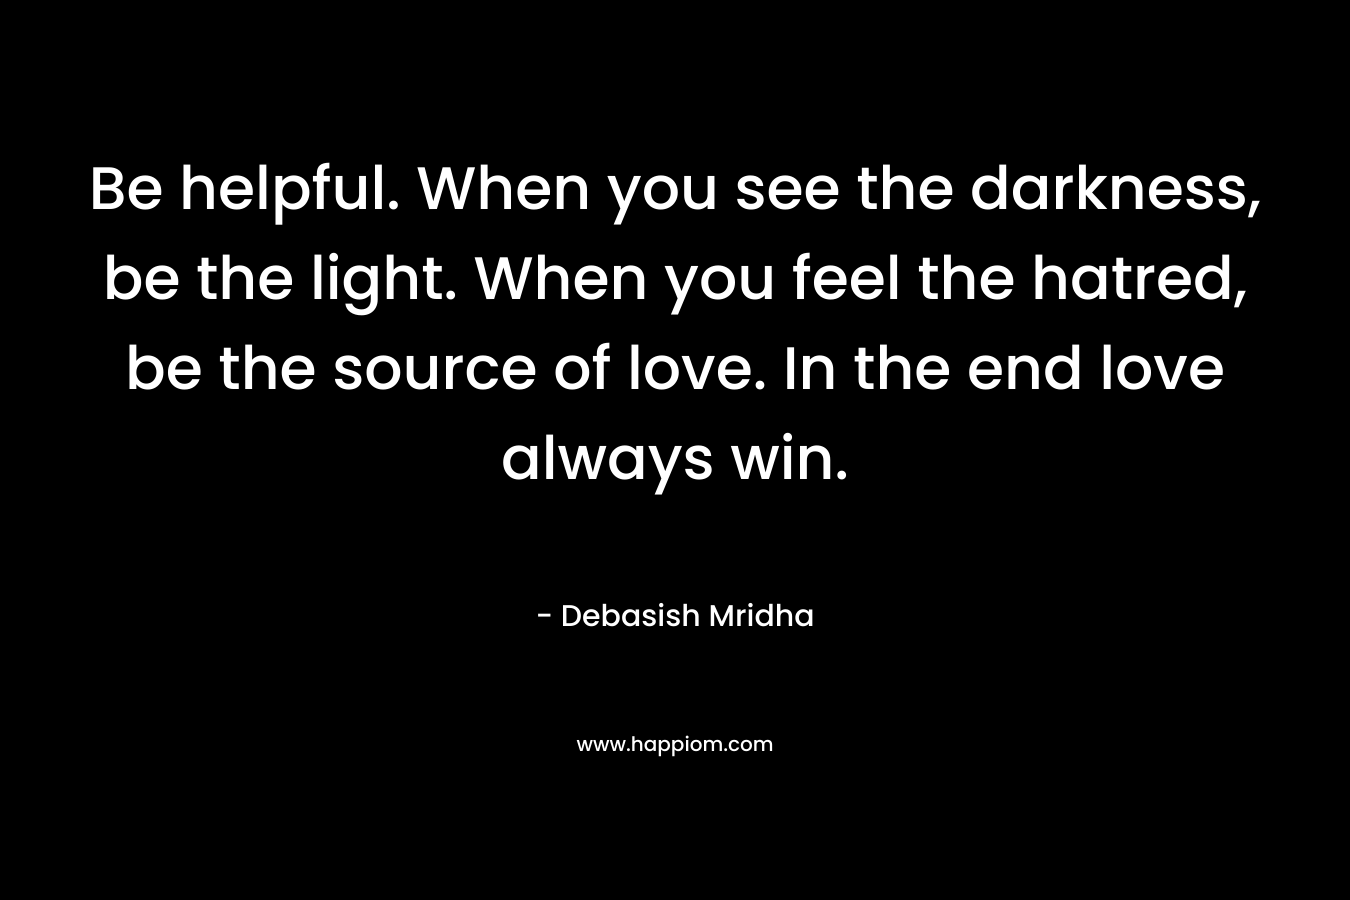 Be helpful. When you see the darkness, be the light. When you feel the hatred, be the source of love. In the end love always win.